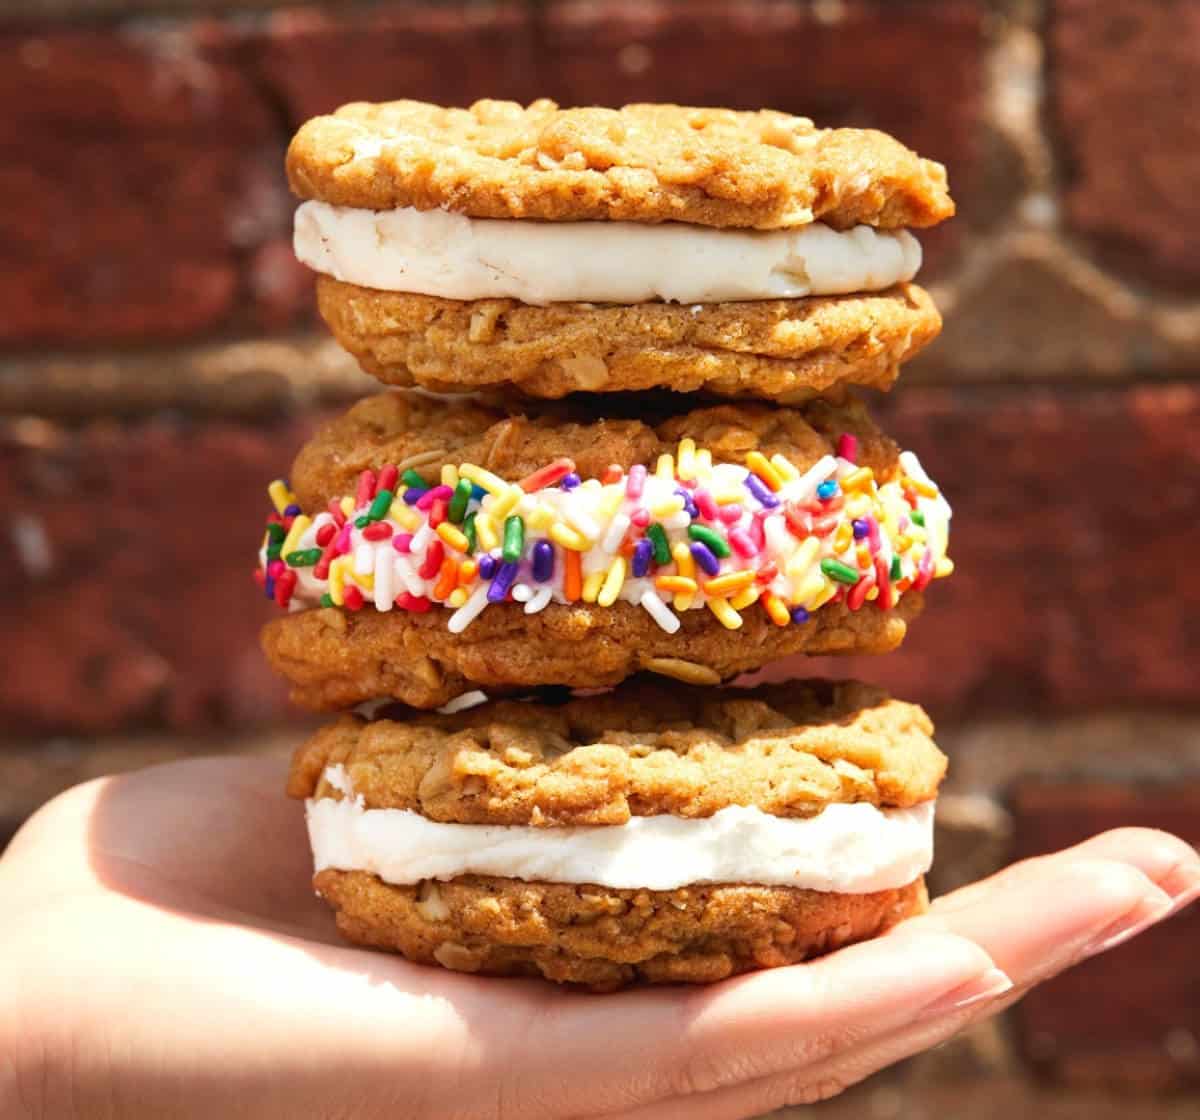 Hand holding a stack of oatmeal cookies filled with vegan buttercream frosting.